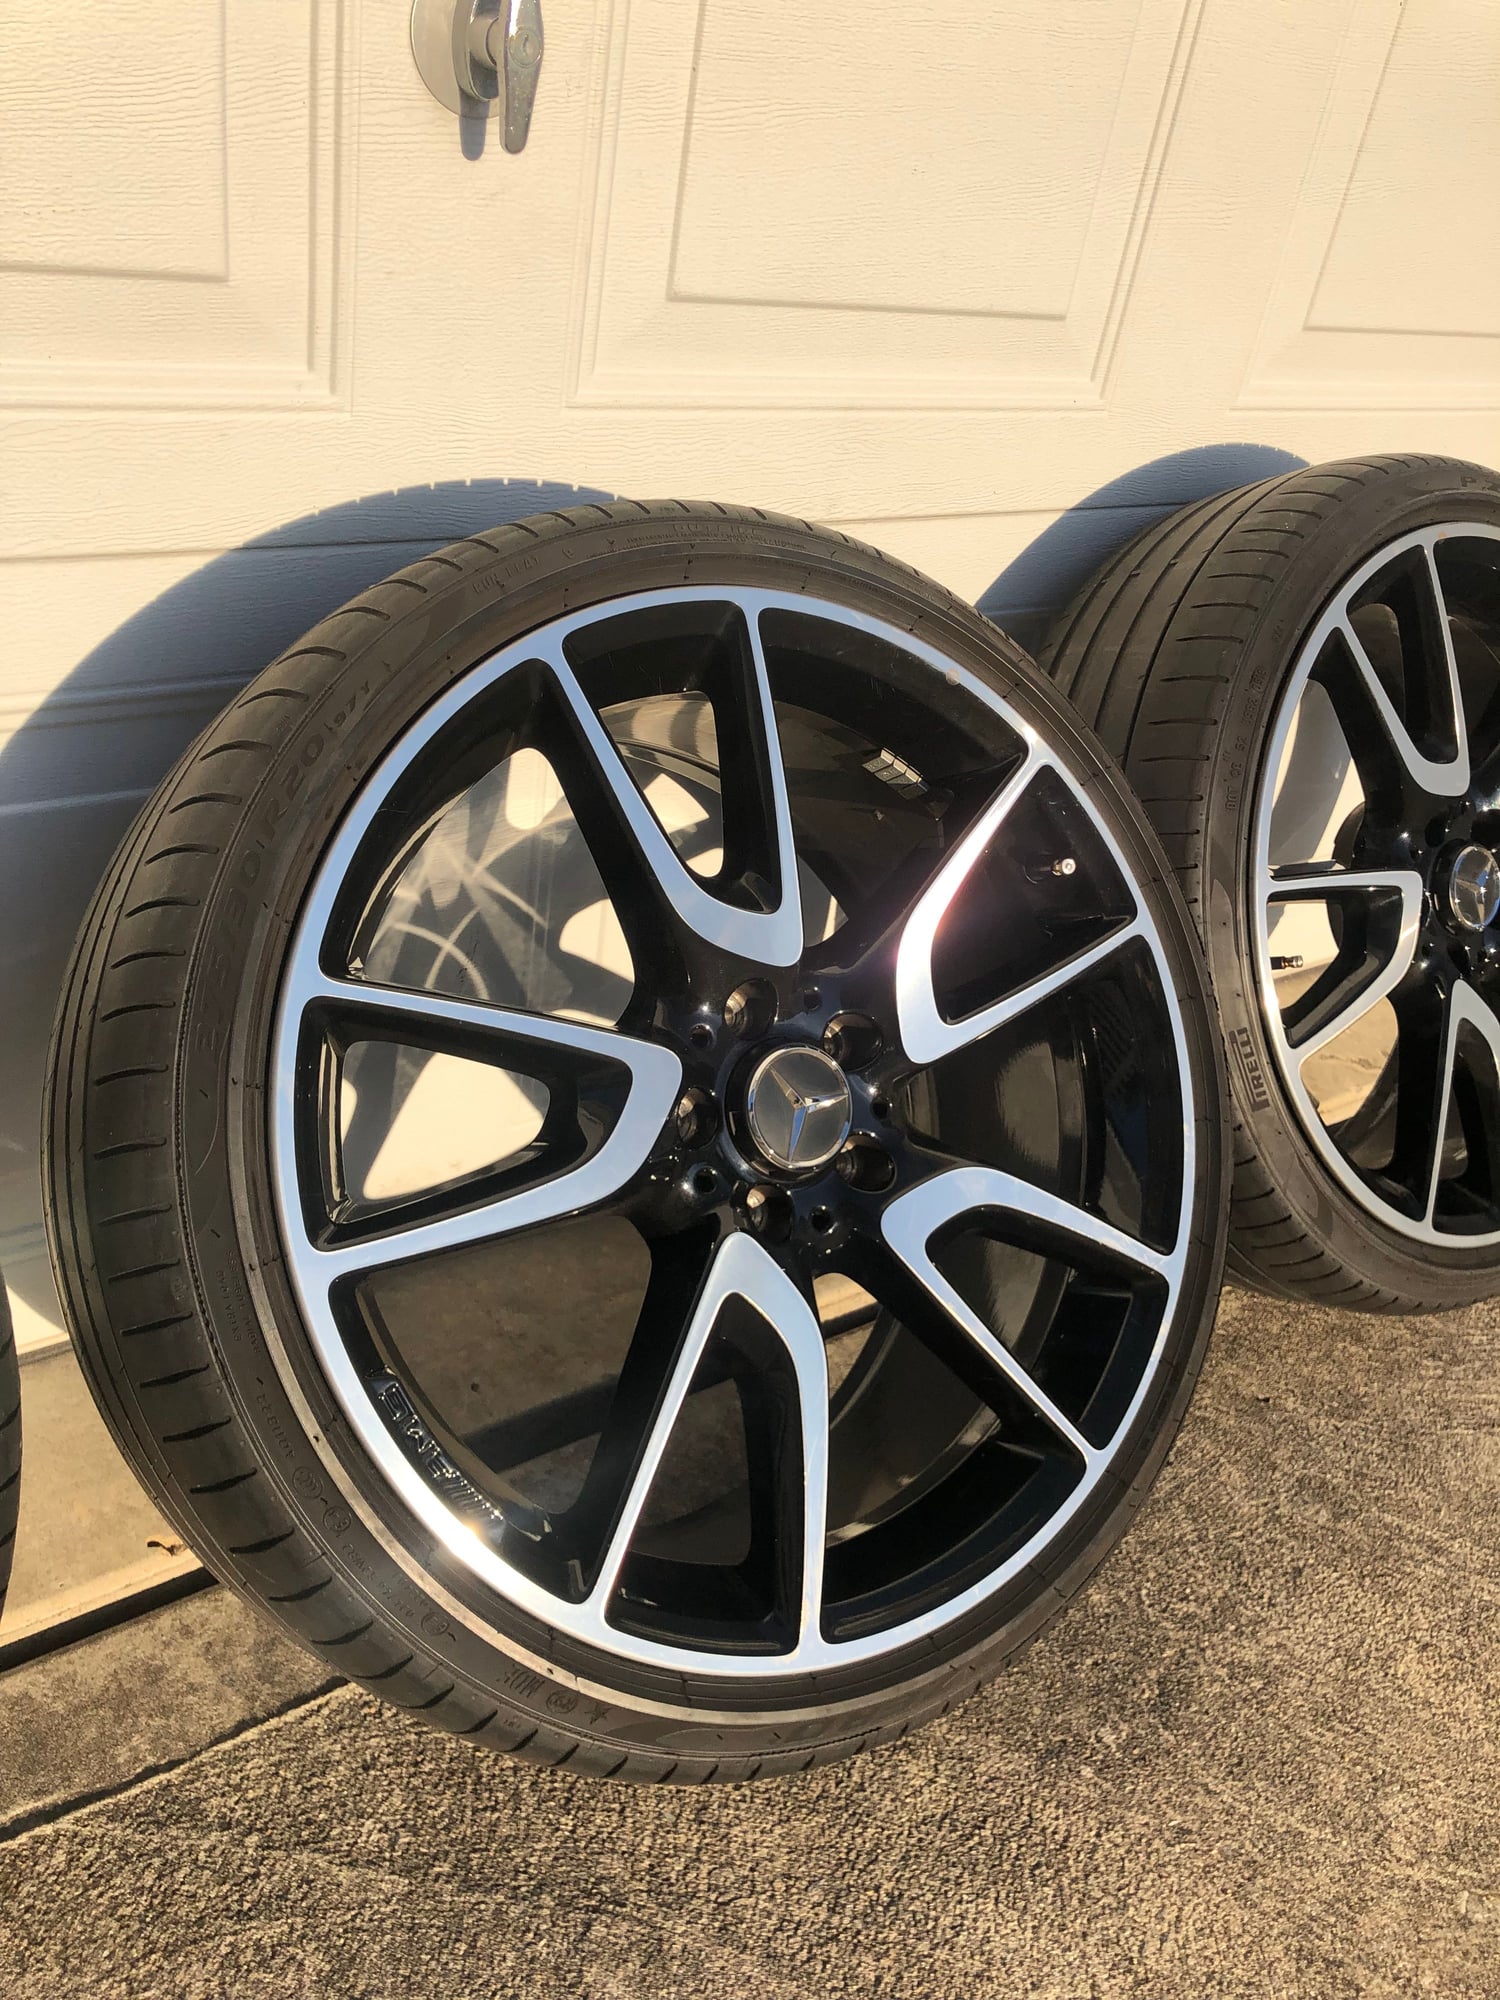 Wheels and Tires/Axles - 2017 e43 oem amg rims - Used - All Years Mercedes-Benz E43 AMG - Lynbrook, NY 11563, United States